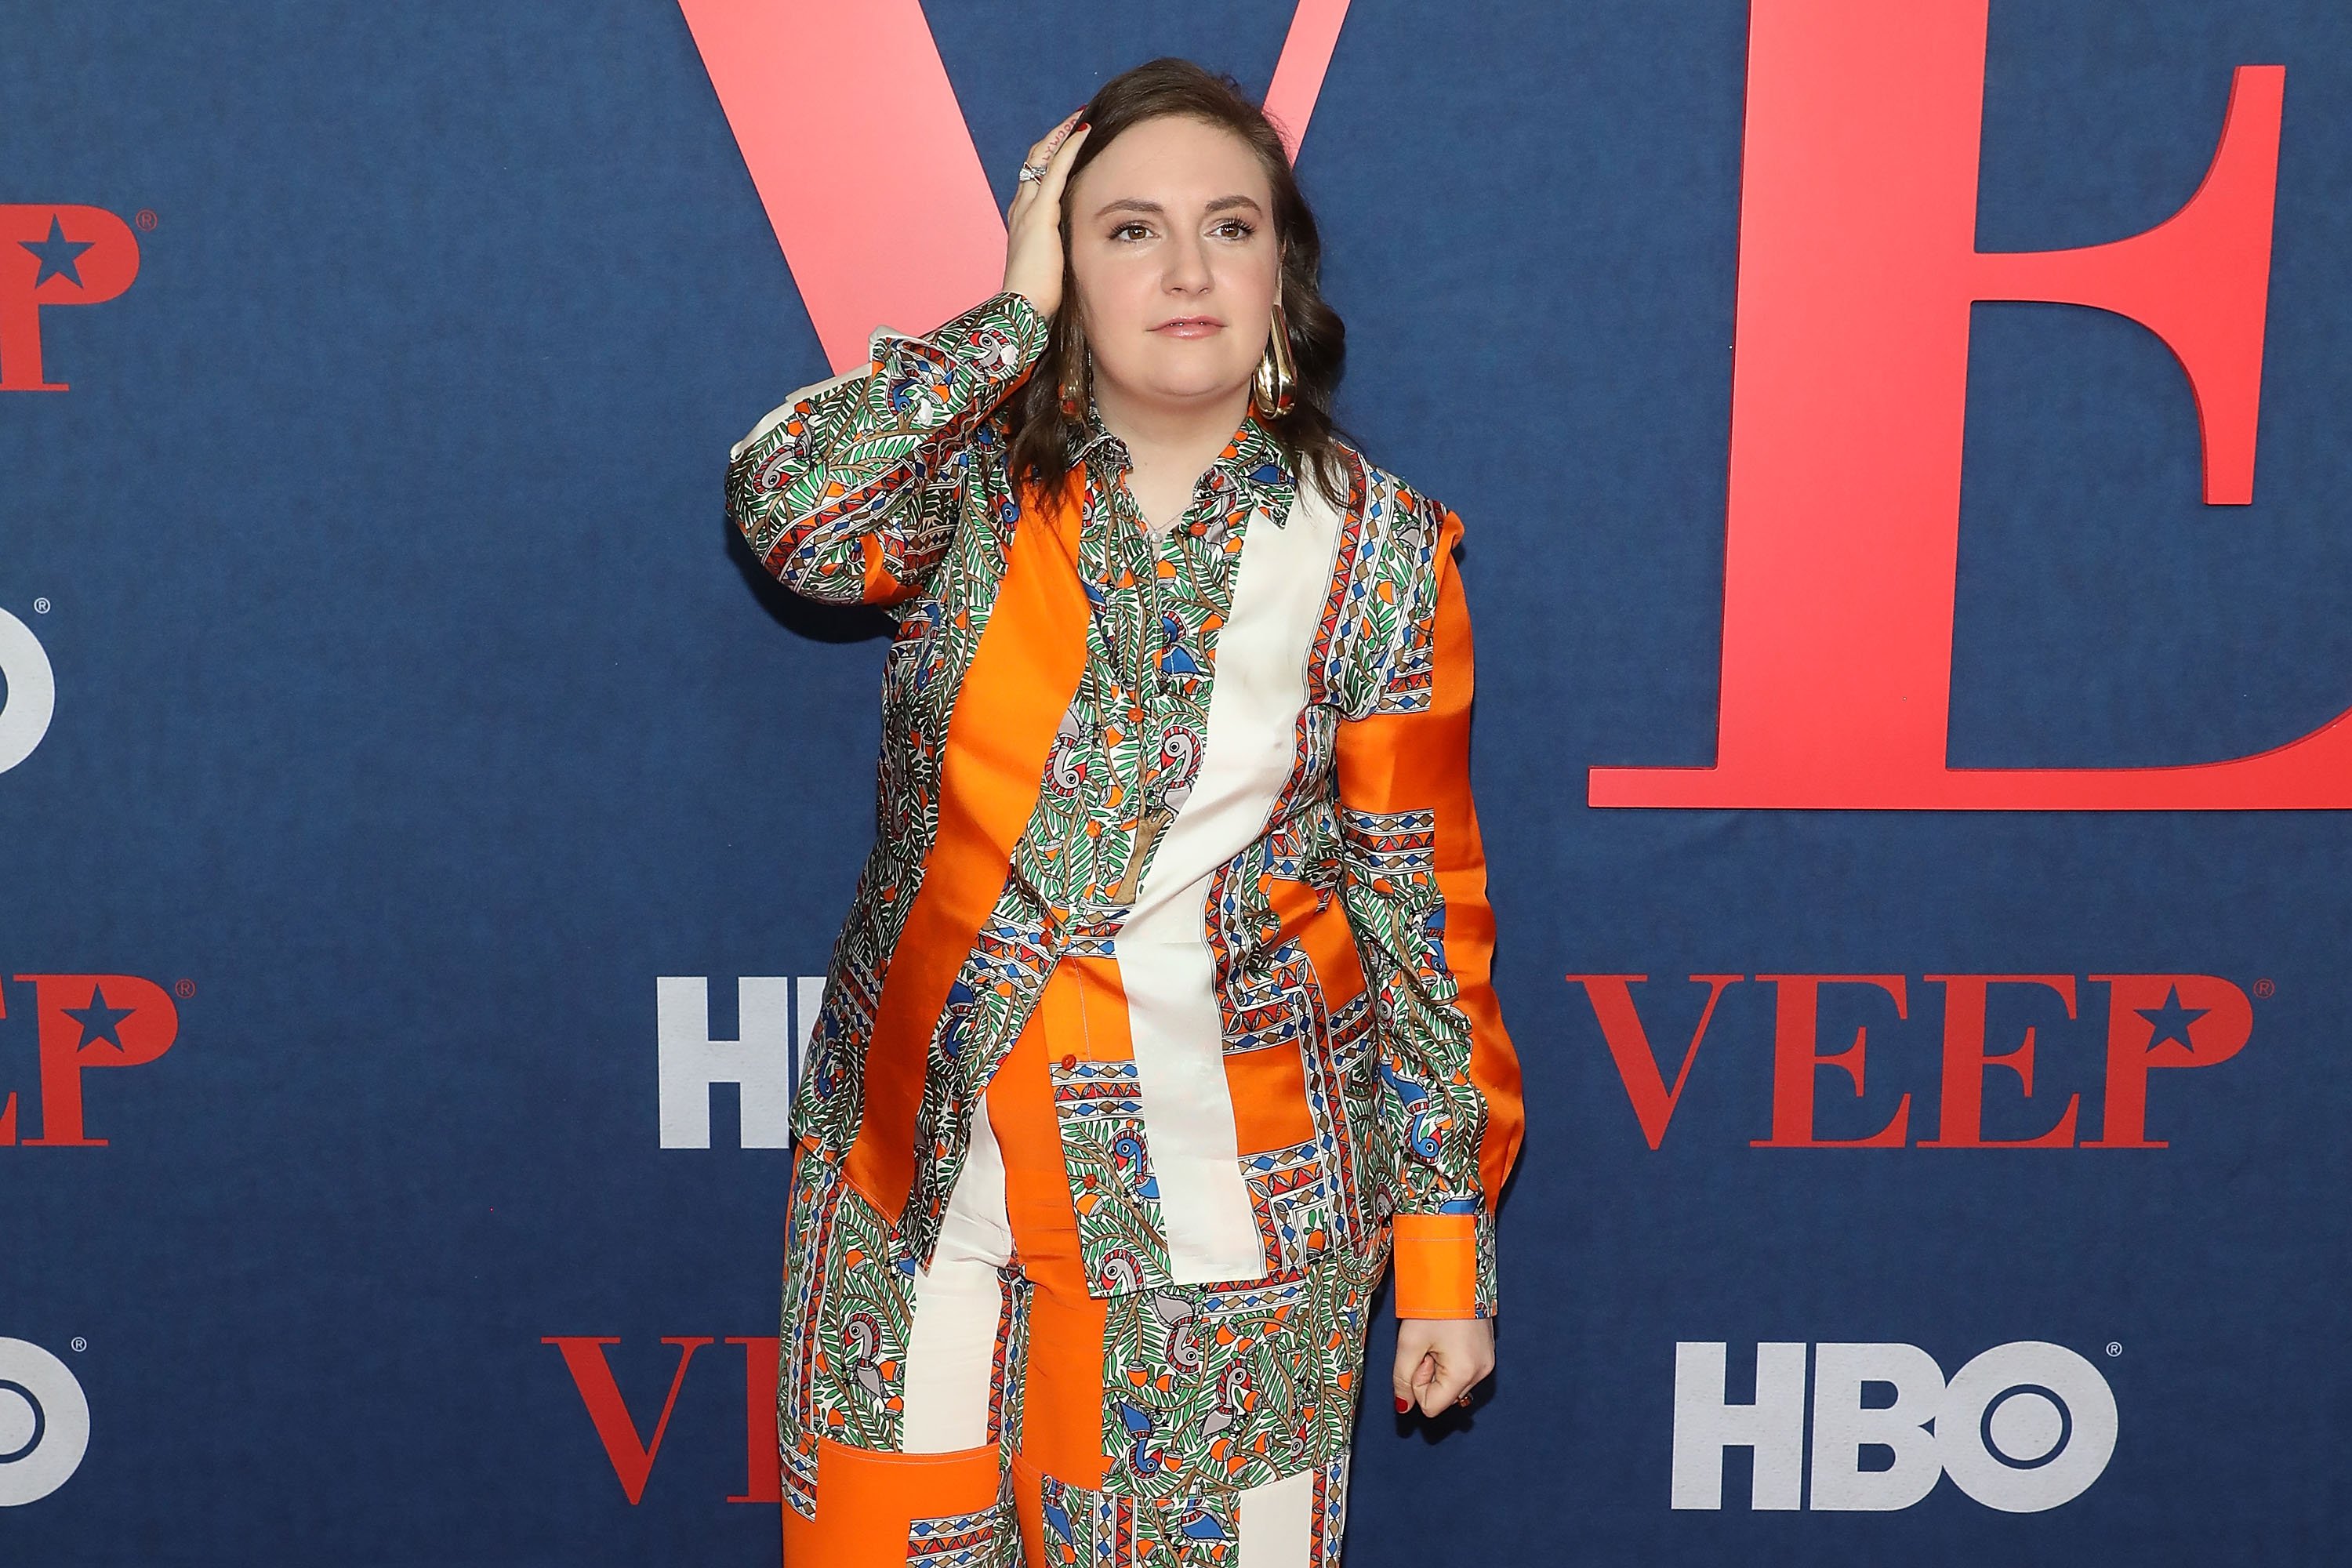 Lena Dunham attends the premiere of "Veep" final season in New York City on March 26, 2019 | Photo: Getty Images